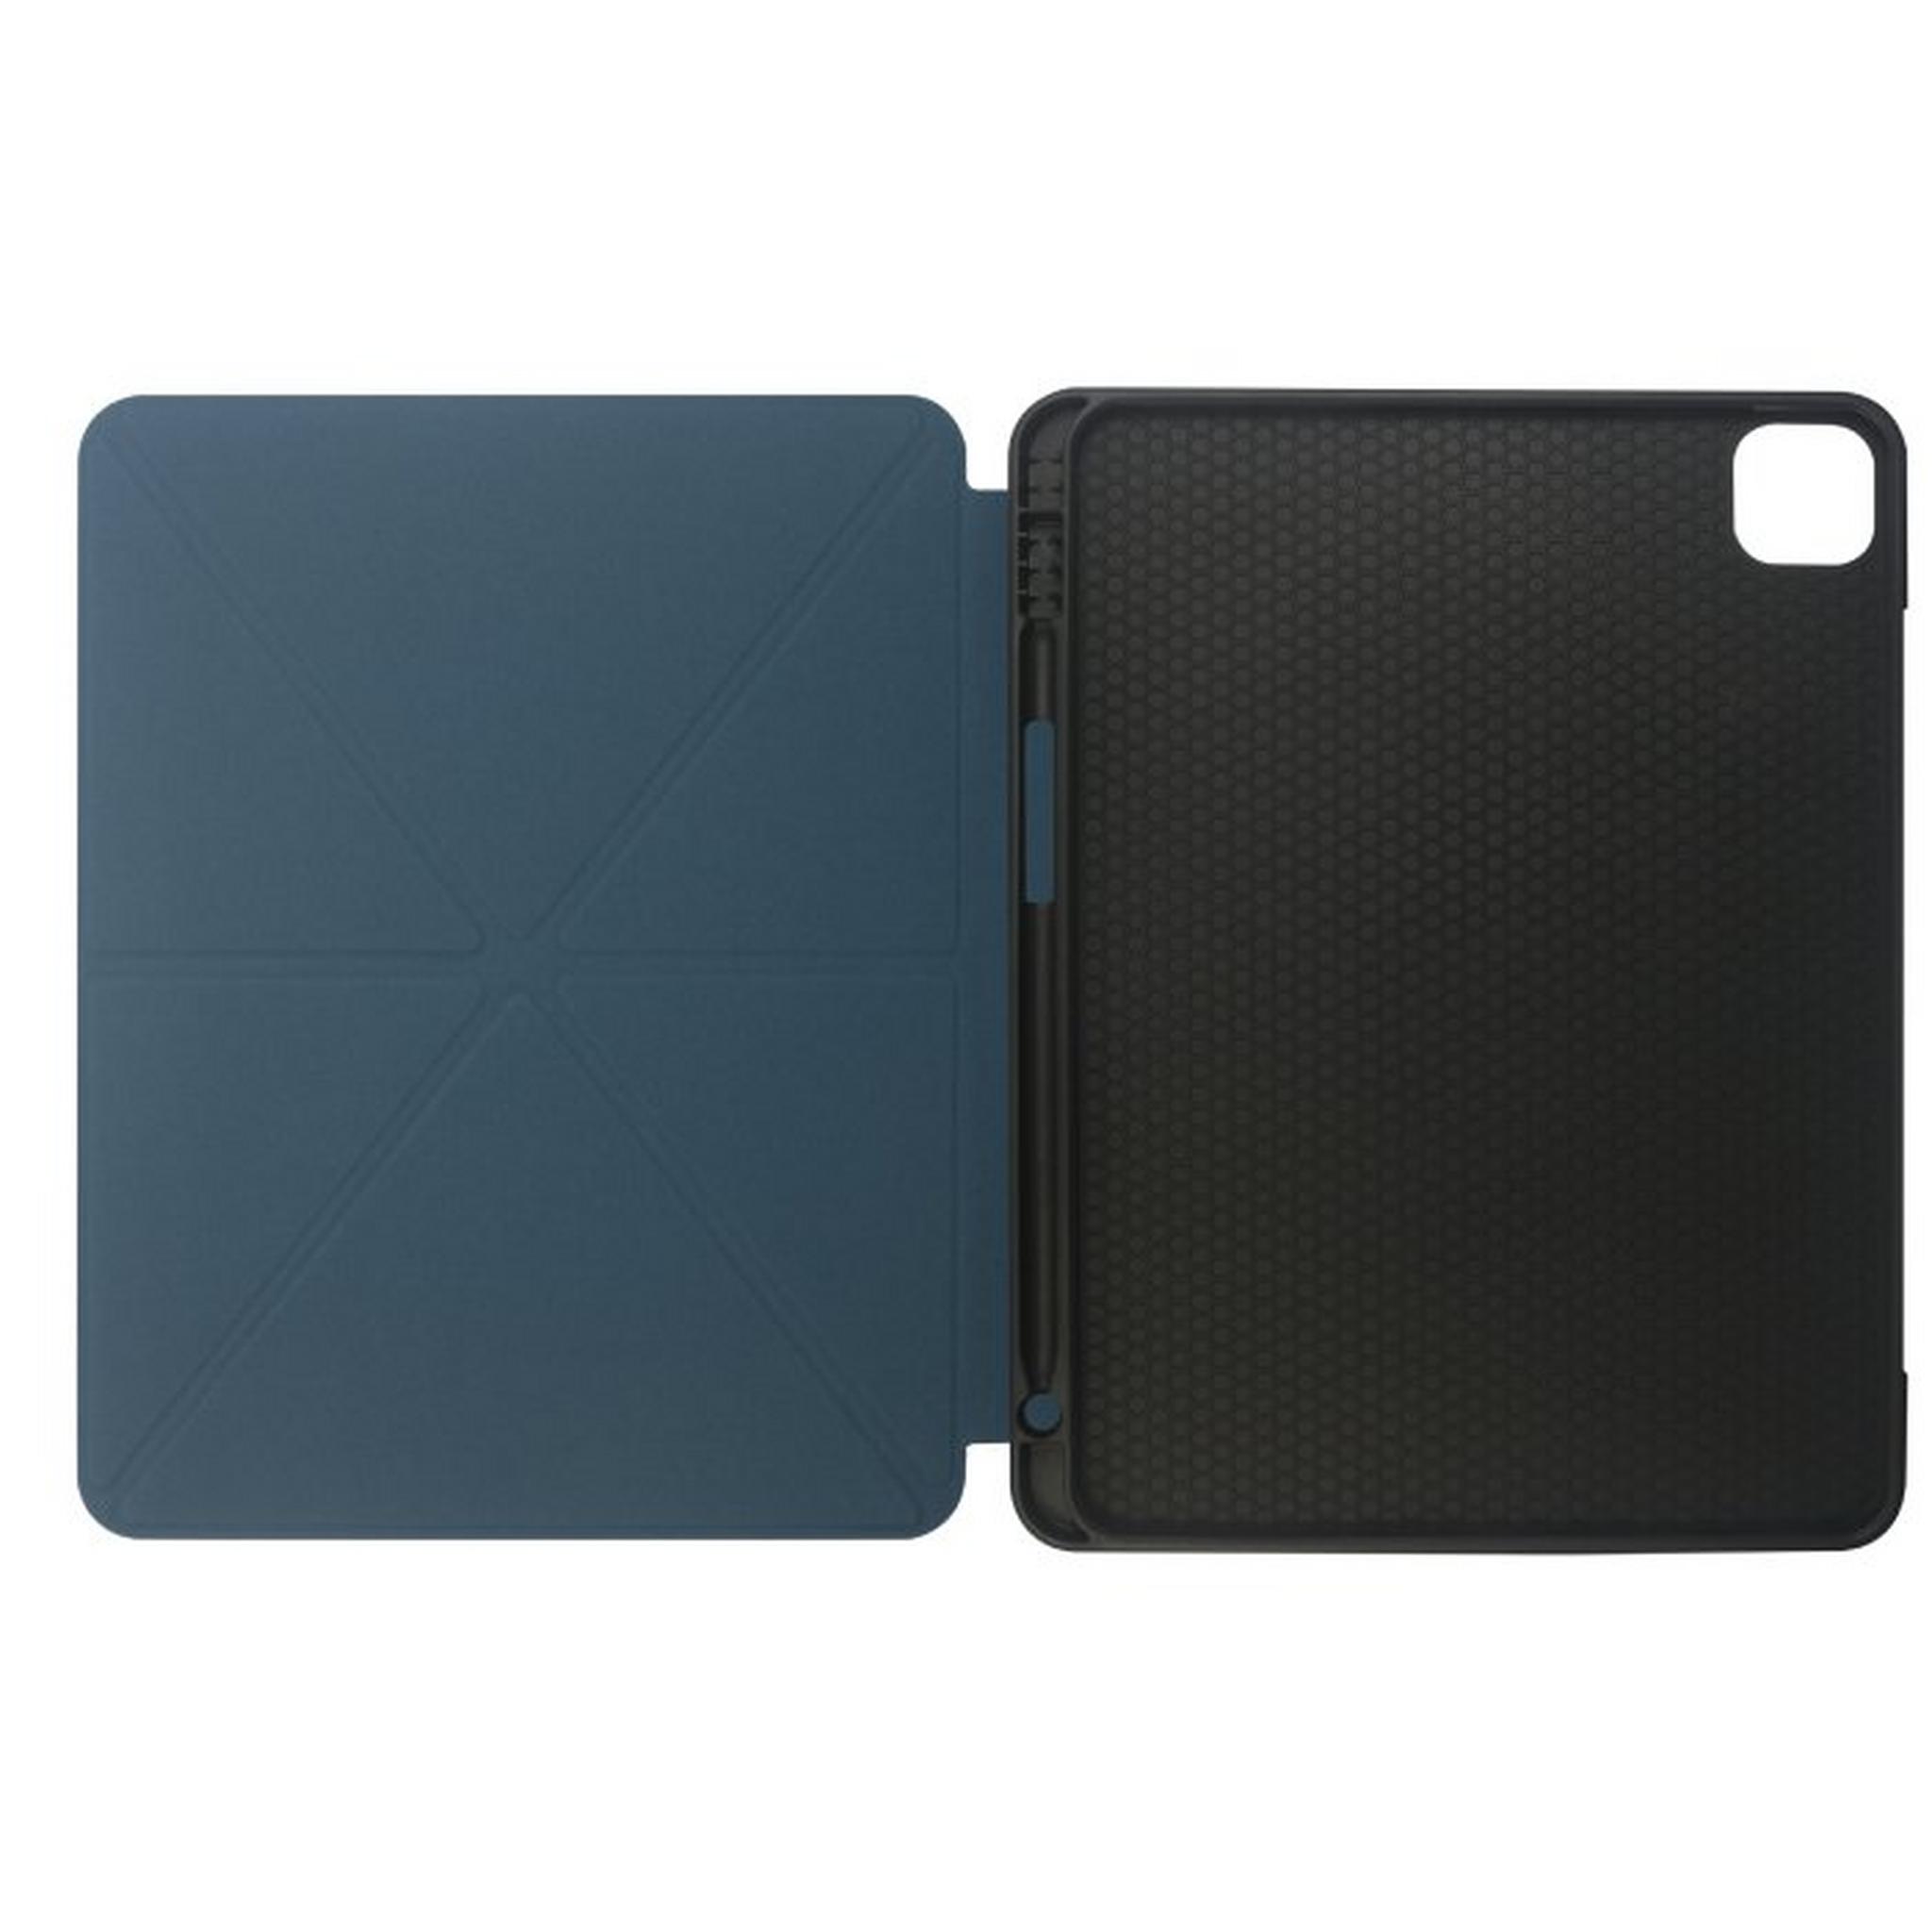 EQ Mebric Case For iPad Pro 11 inch - Navy